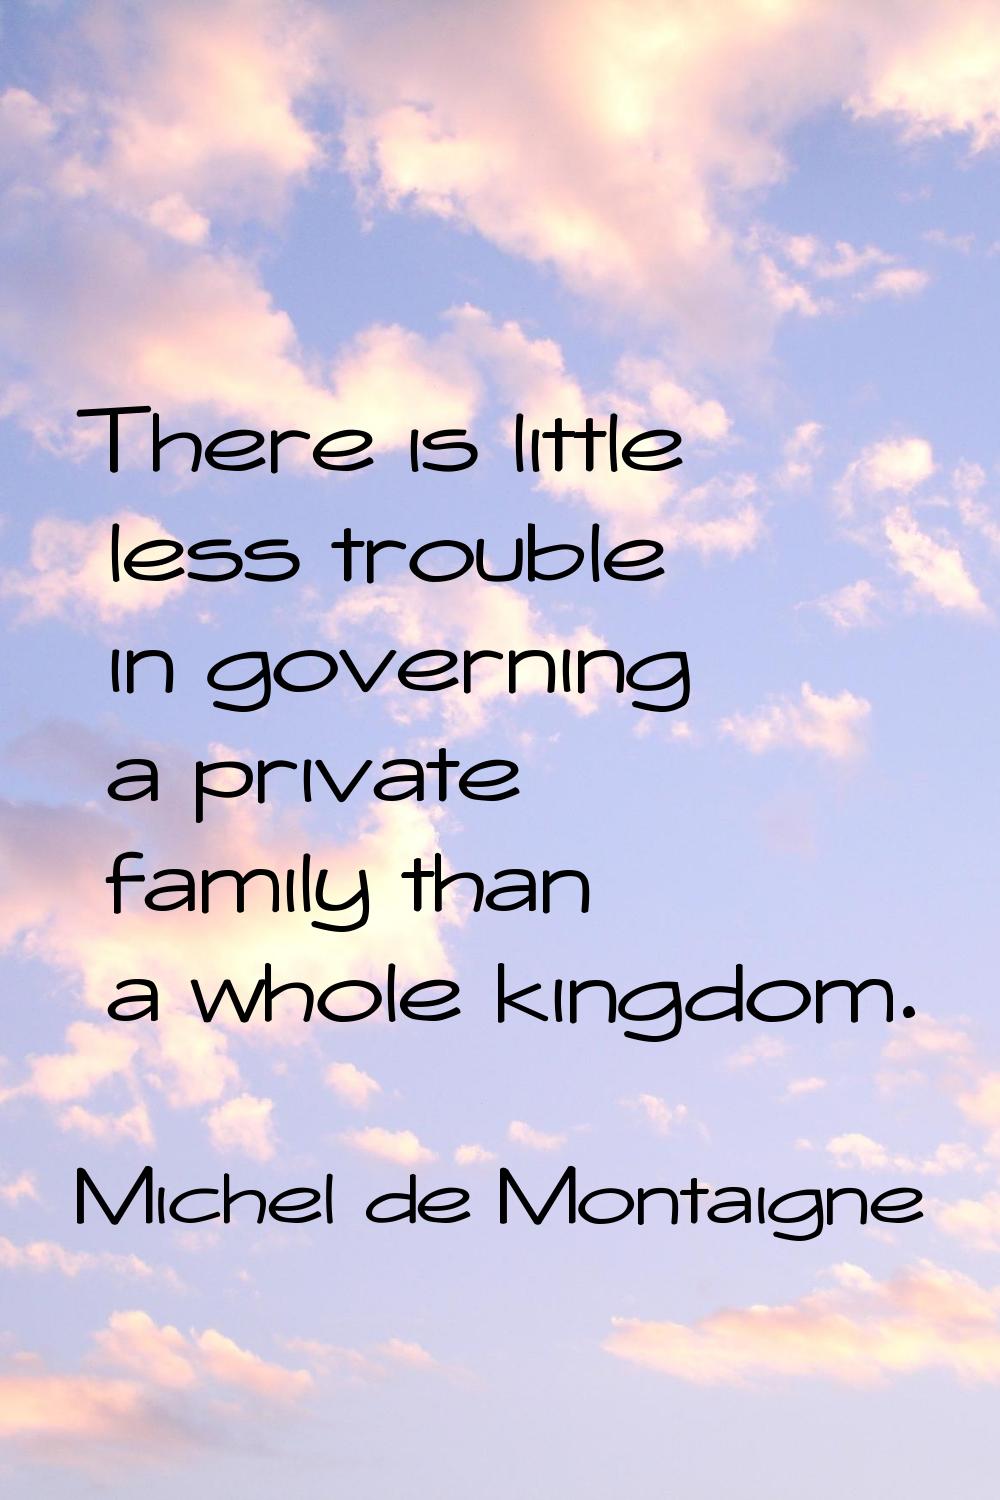 There is little less trouble in governing a private family than a whole kingdom.